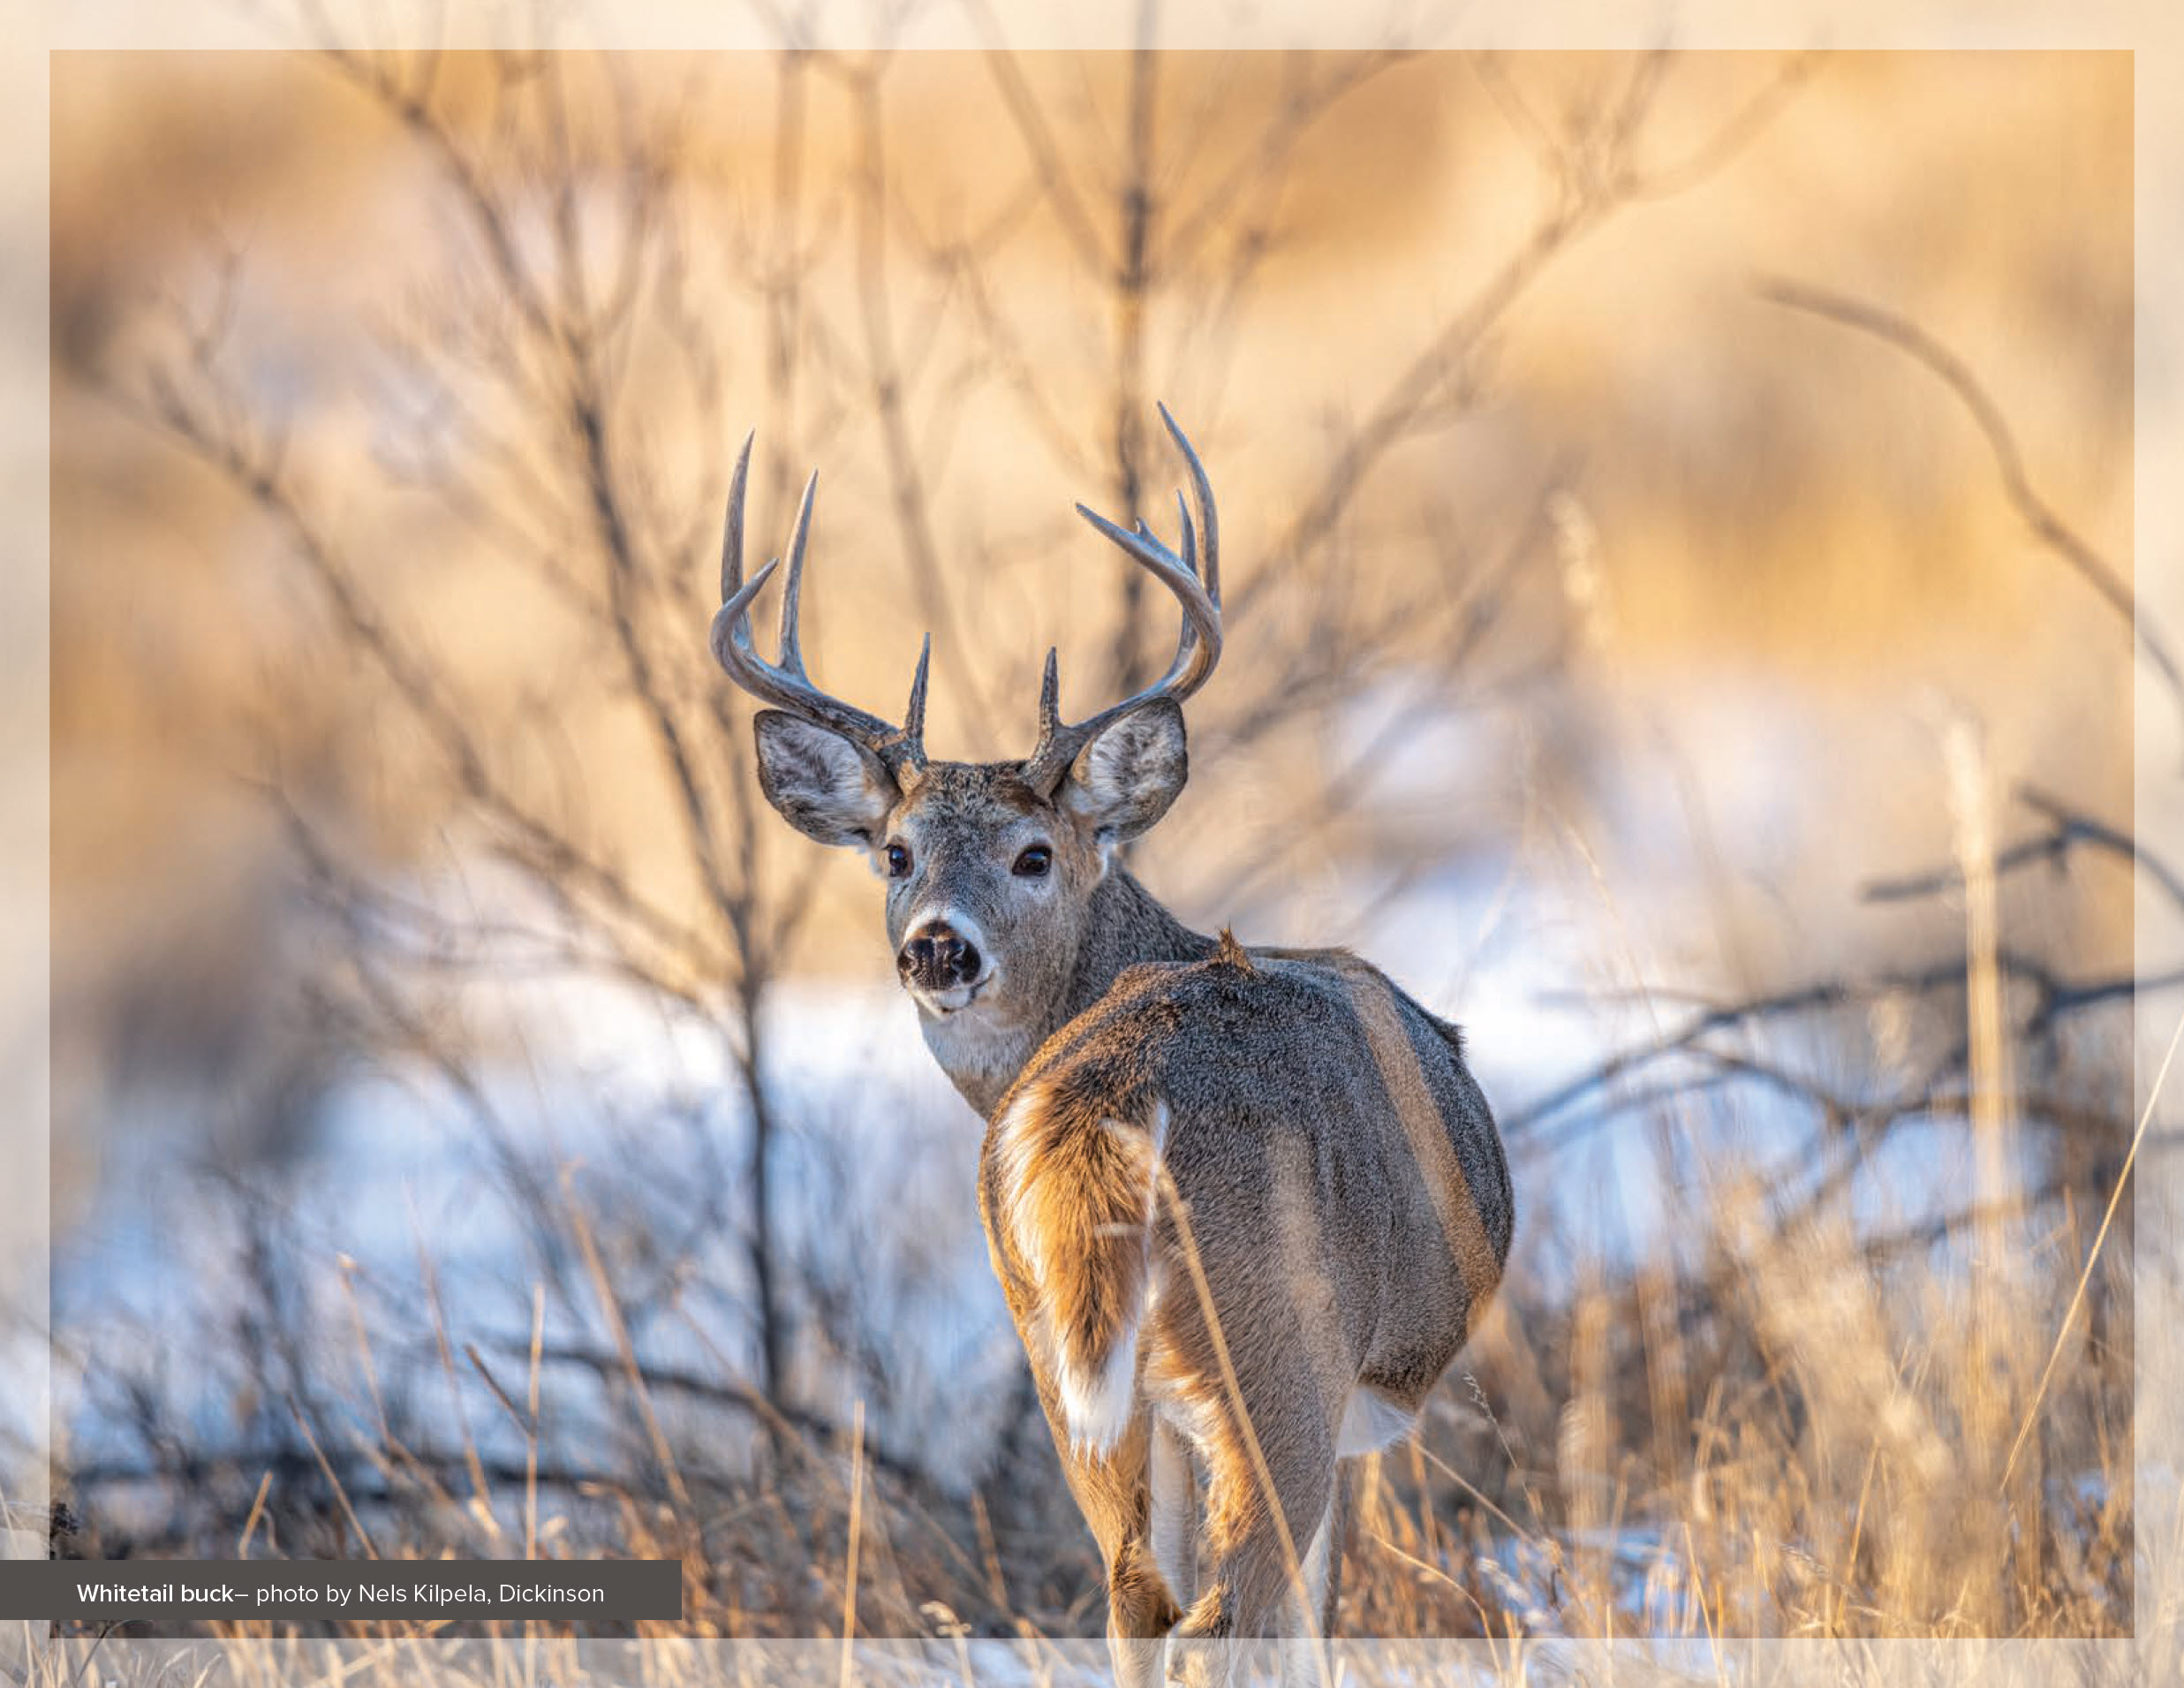 Whitetail buck– photo by Nels Kilpela, Dickinson